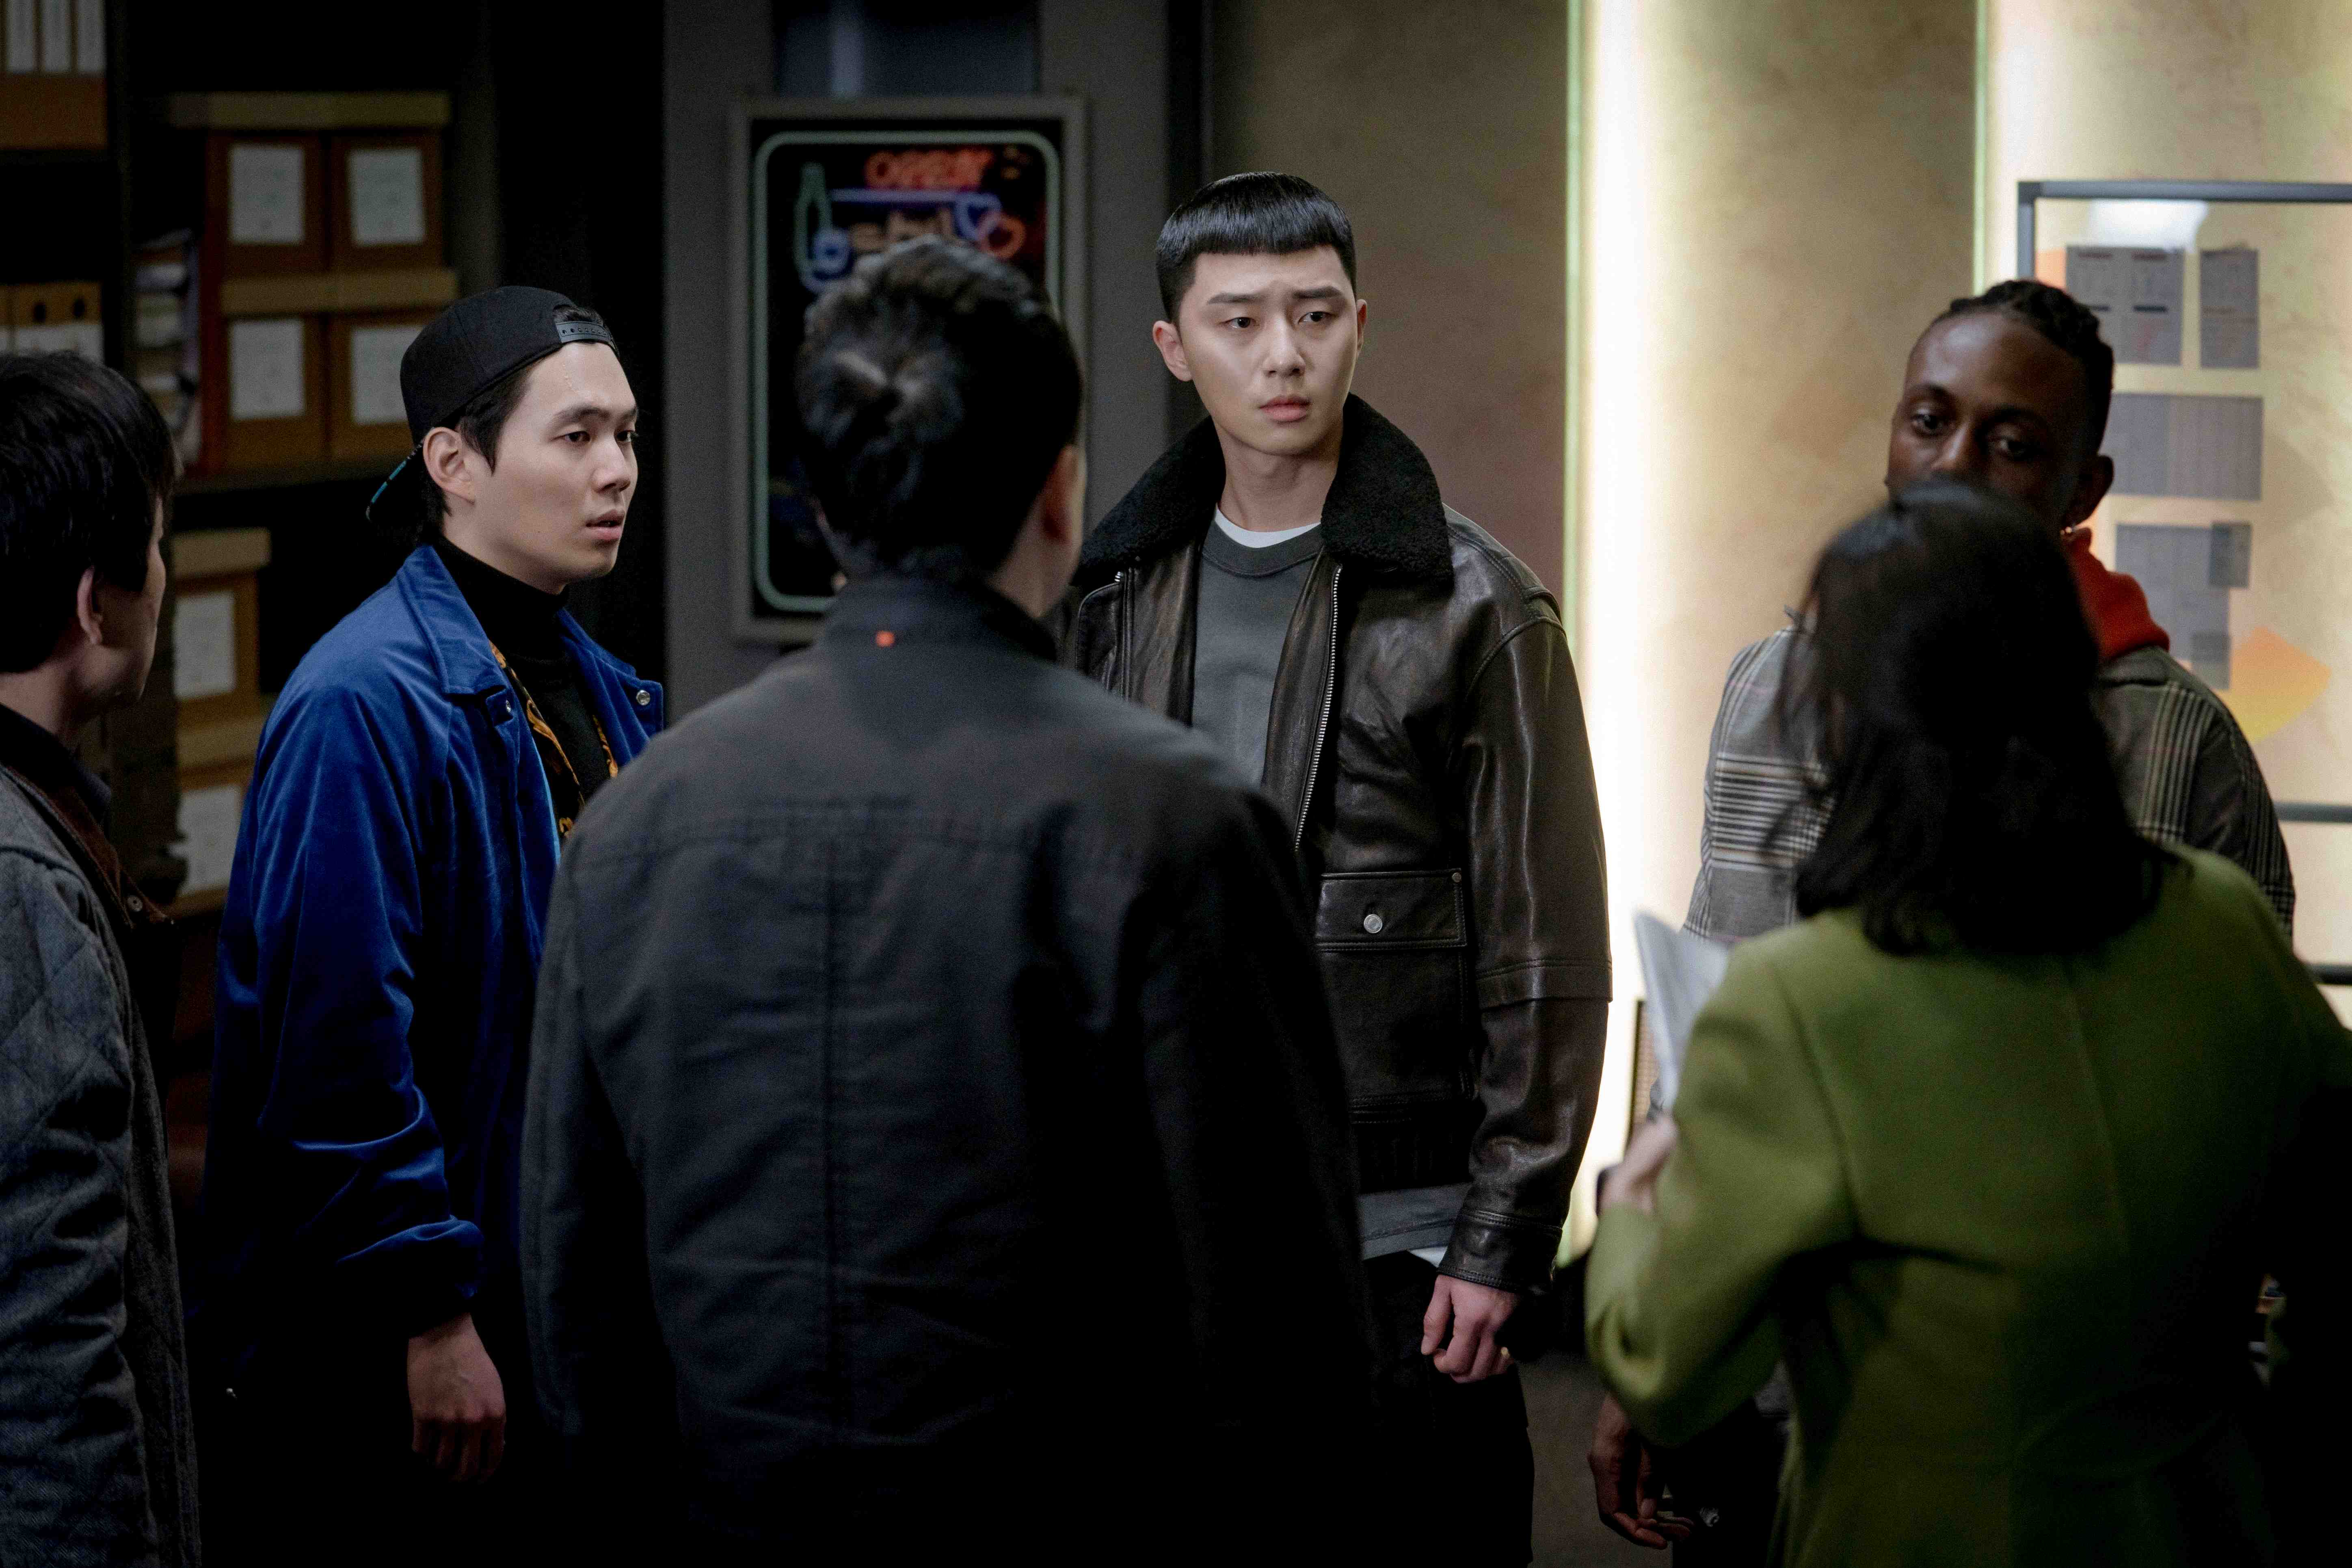 One Clath Park Seo-joon is on a dangerous thorn path.JTBCs Golden Clath (director Kim Sung-yoon, playwright Cho Kwang-jin, production showbox and writing, One work, Web toon One Clath) will be on the 7th, ahead of the 12th broadcast, with a single-night office that turned into a mess and a still cut filled with eyes of a Park Seo-joon man full of Furious It is arousing curiosity by revealing it.In the last broadcast, Park has become one step closer to the long dream of branding a night.In the preliminary round of the TV contest program Miniforce, he won first place with Changga, and representative Do Jung-myeong (played by Jeon No-min) came to show his intention to invest in the night.After a long time, Park decided to follow Joe-yool Lee (Kim Dae-mi)s opinion and receive an investment proposal.A series of investors in the middle of the night attracted 10 billion won in investment, which started to spur the branding of the night.Meanwhile, at the end of the broadcast, Joe-yool Lees fond confession was also drawn.She wondered what the mixed feelings of Joe-yol Lee, who had not said anything to his answer, would change their relationship, even though her tears were bothering her, pushing her away, saying, Dont like me.In the meantime, at the most brilliant moment of Roys life, Dangers shadow is cast again. The photo released on this day shows a scene commemorating the opening of the brand at night.But the people who took control of the office with a mixture of faces, and the letters congratulations of the banner hanging on top of them are overshadowed.The franchise owners of the night are starting to protest, and the hot eyes of Roy, who seems to be Explosion at any moment among the owners of One Castle, are not unusual.You came here and decided to do it, he told the people who were blaming him in the previous preview.I have tasted it and decided! As the appearance of the Park is revealed, attention is paid to the survival of the night.In the 12th episode, which will air today (7th), Jang Dae-hee (Yoo Jae-myeong), who is setting a day of check ahead of the final of Miniforce, and Jang Geun-soo (Kim Dong-hee), who takes out the ruthless defeat of his ruthless scheme, are drawn.The heart of a long-haired man who touches his people to kneel down a man, who re-establishes his will to revenge, saying, A thousand dollars boil in the inside, is hotter.The flower path of the night that was just going perfectly, and how Roy, who was once again struck by an unexpected Danger, will overcome Danger, the production team of One Klath said, adding that the identity of the middle name of the proposal for a large investment on the show today (Seventh) will be revealed and will give a reversal.Meanwhile, the 12th episode of One Klath in Italy will air today (7th) at 10:50 p.m. on JTBC.iMBC Kim Hye-young  Photo JTBC